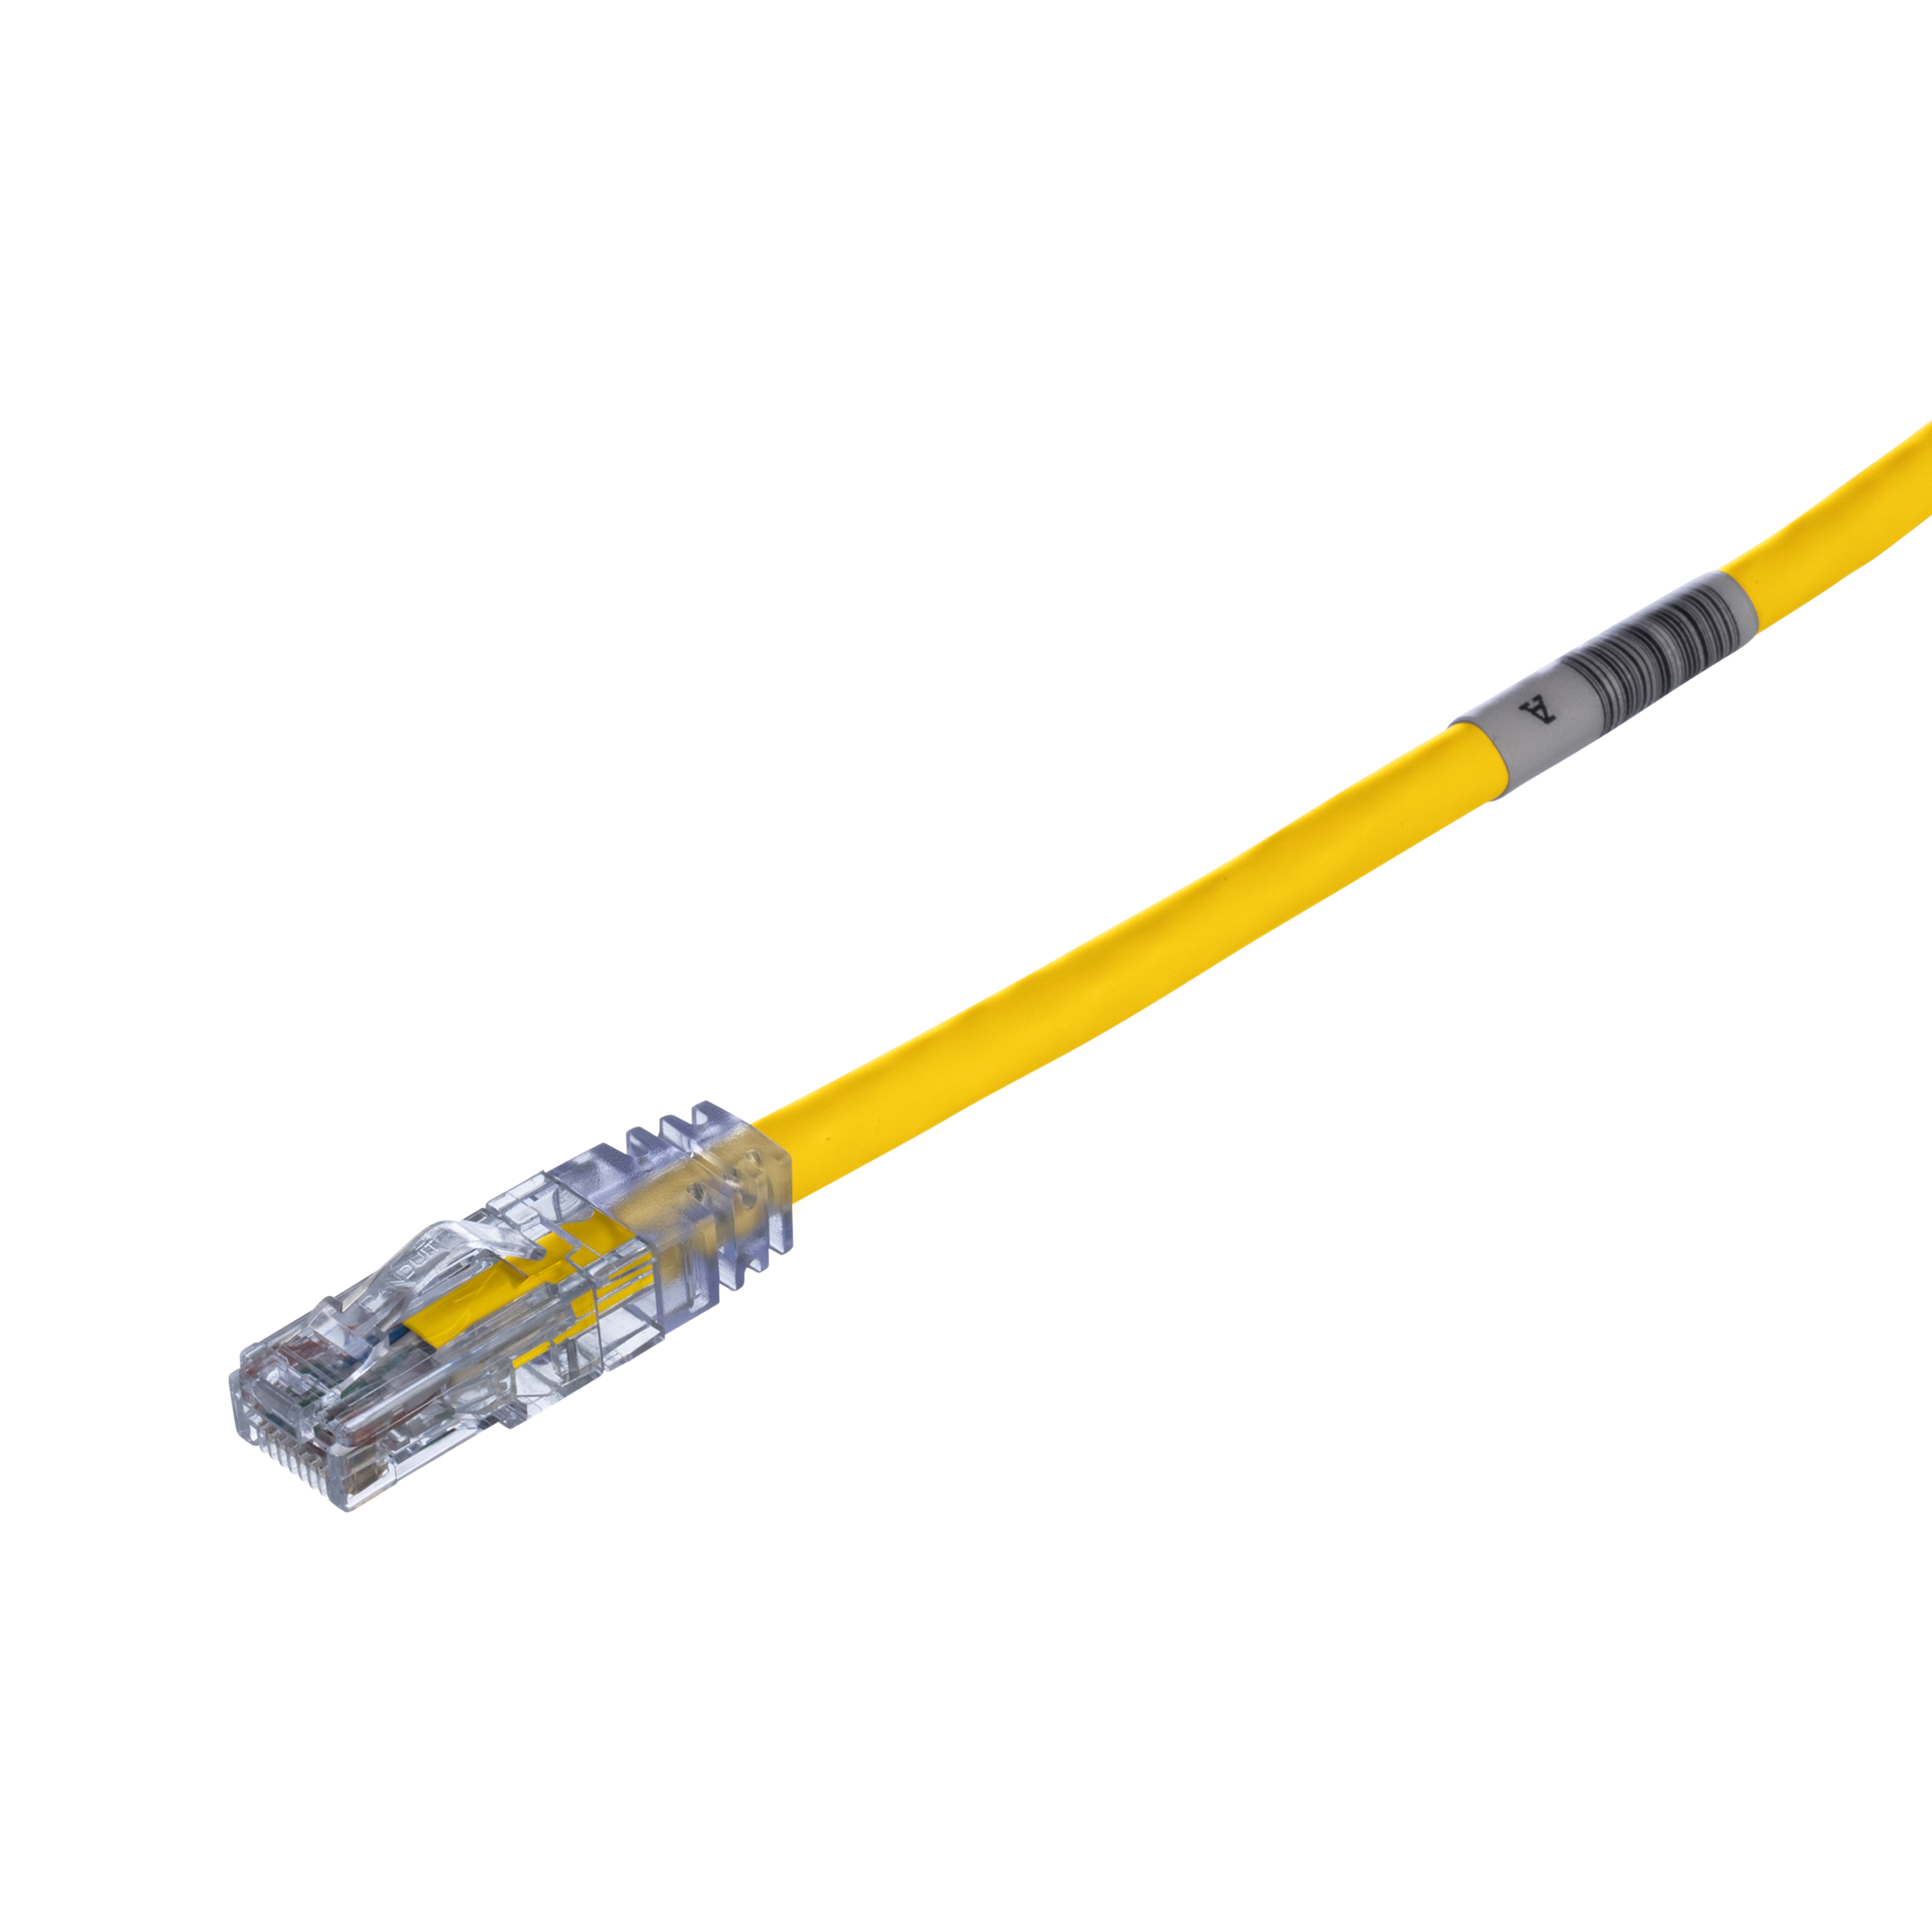 Cat 6 24 AWG UTP Copper Patch Cord, 7 m, Yellow